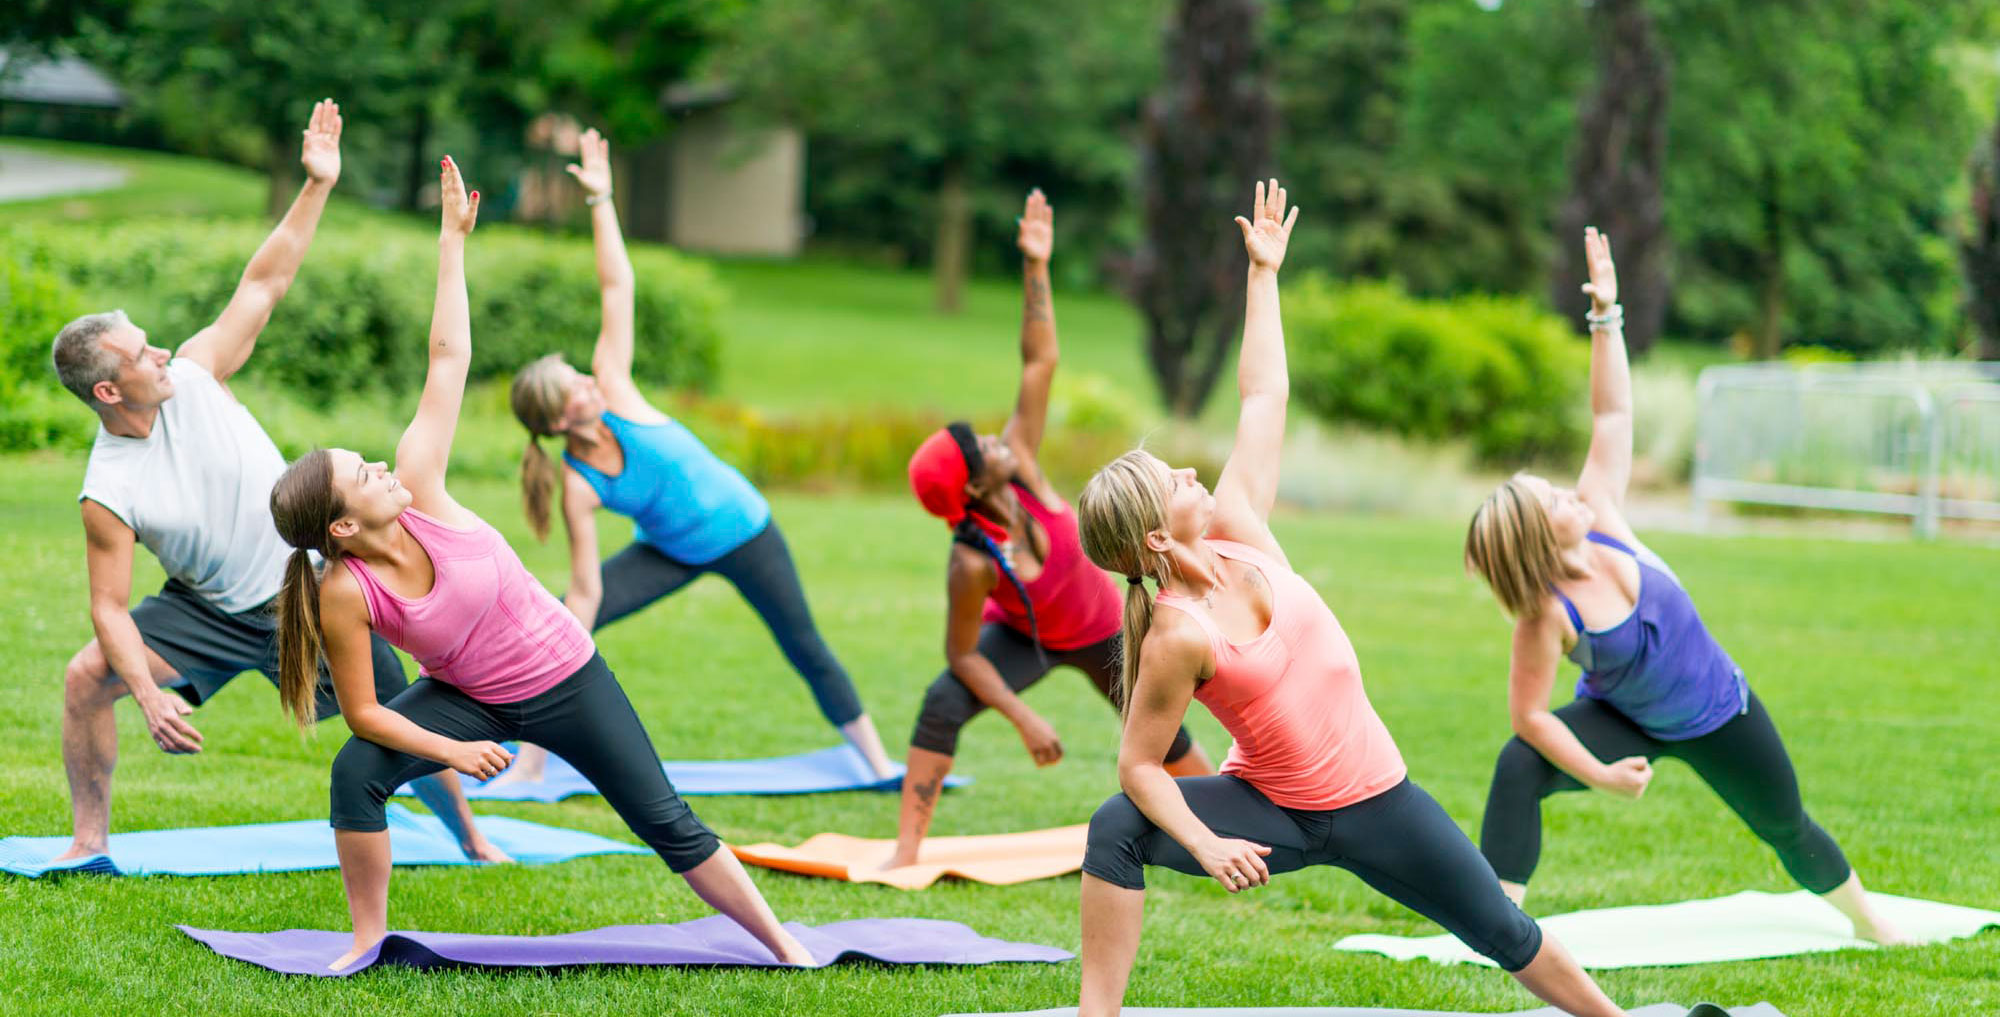 Yoga at the Body Camp